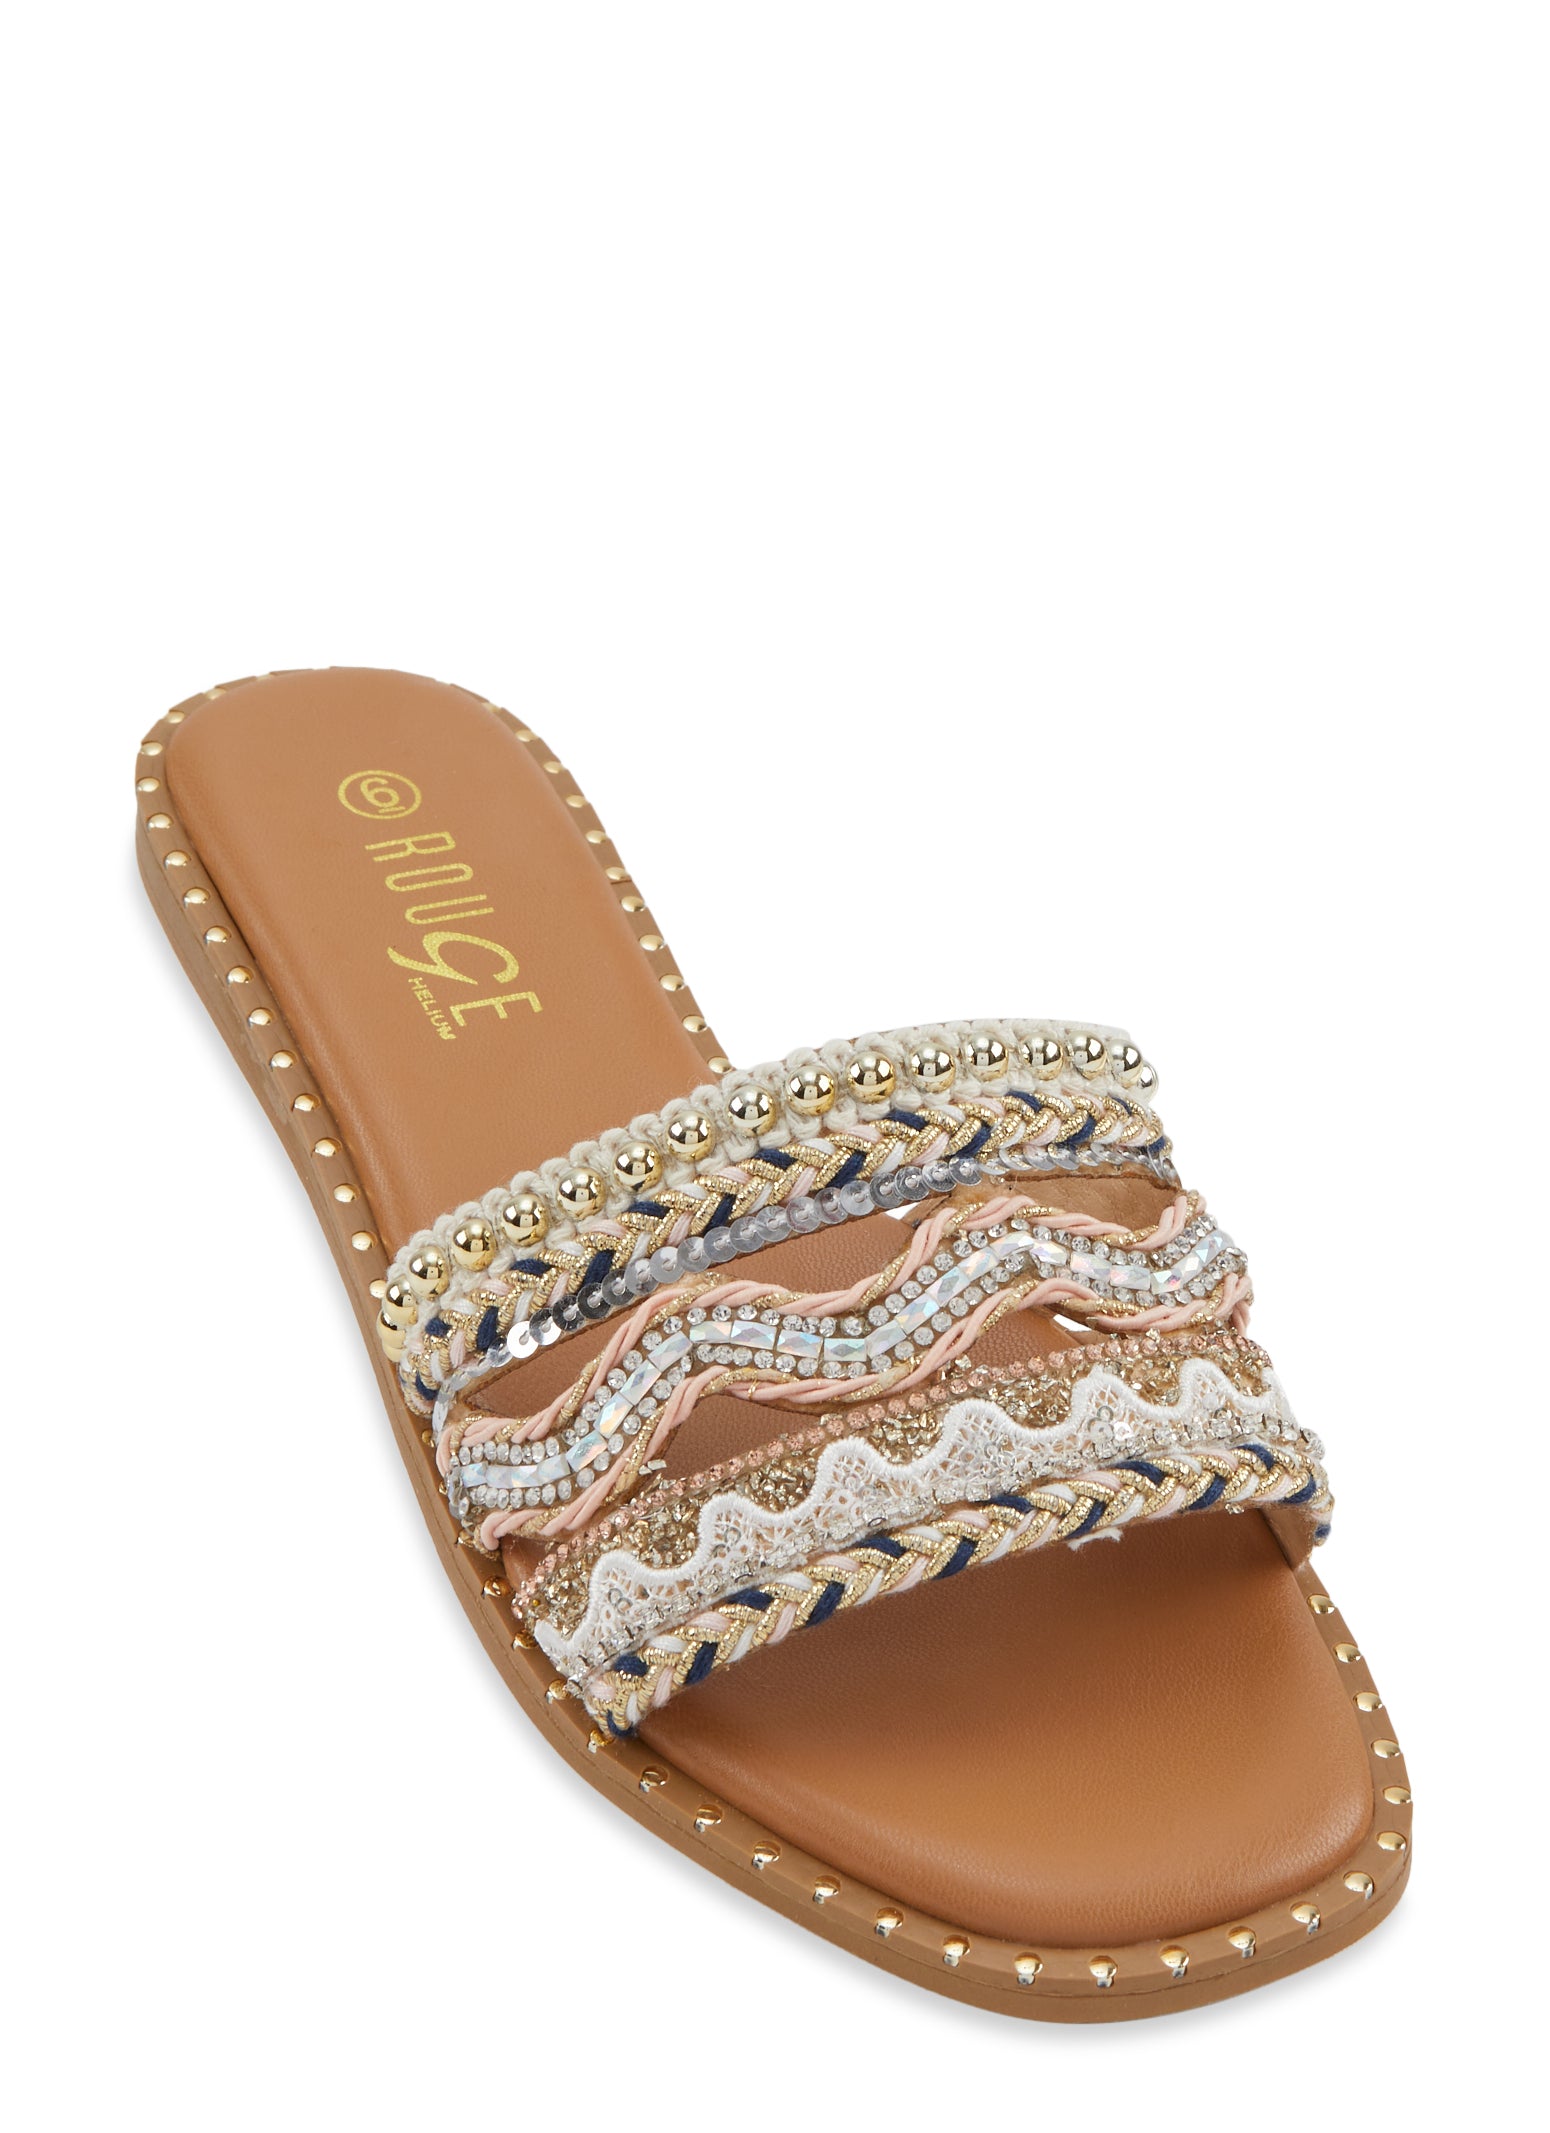 Studded Embroidered Sequin Cut Out Band Slide Sandals